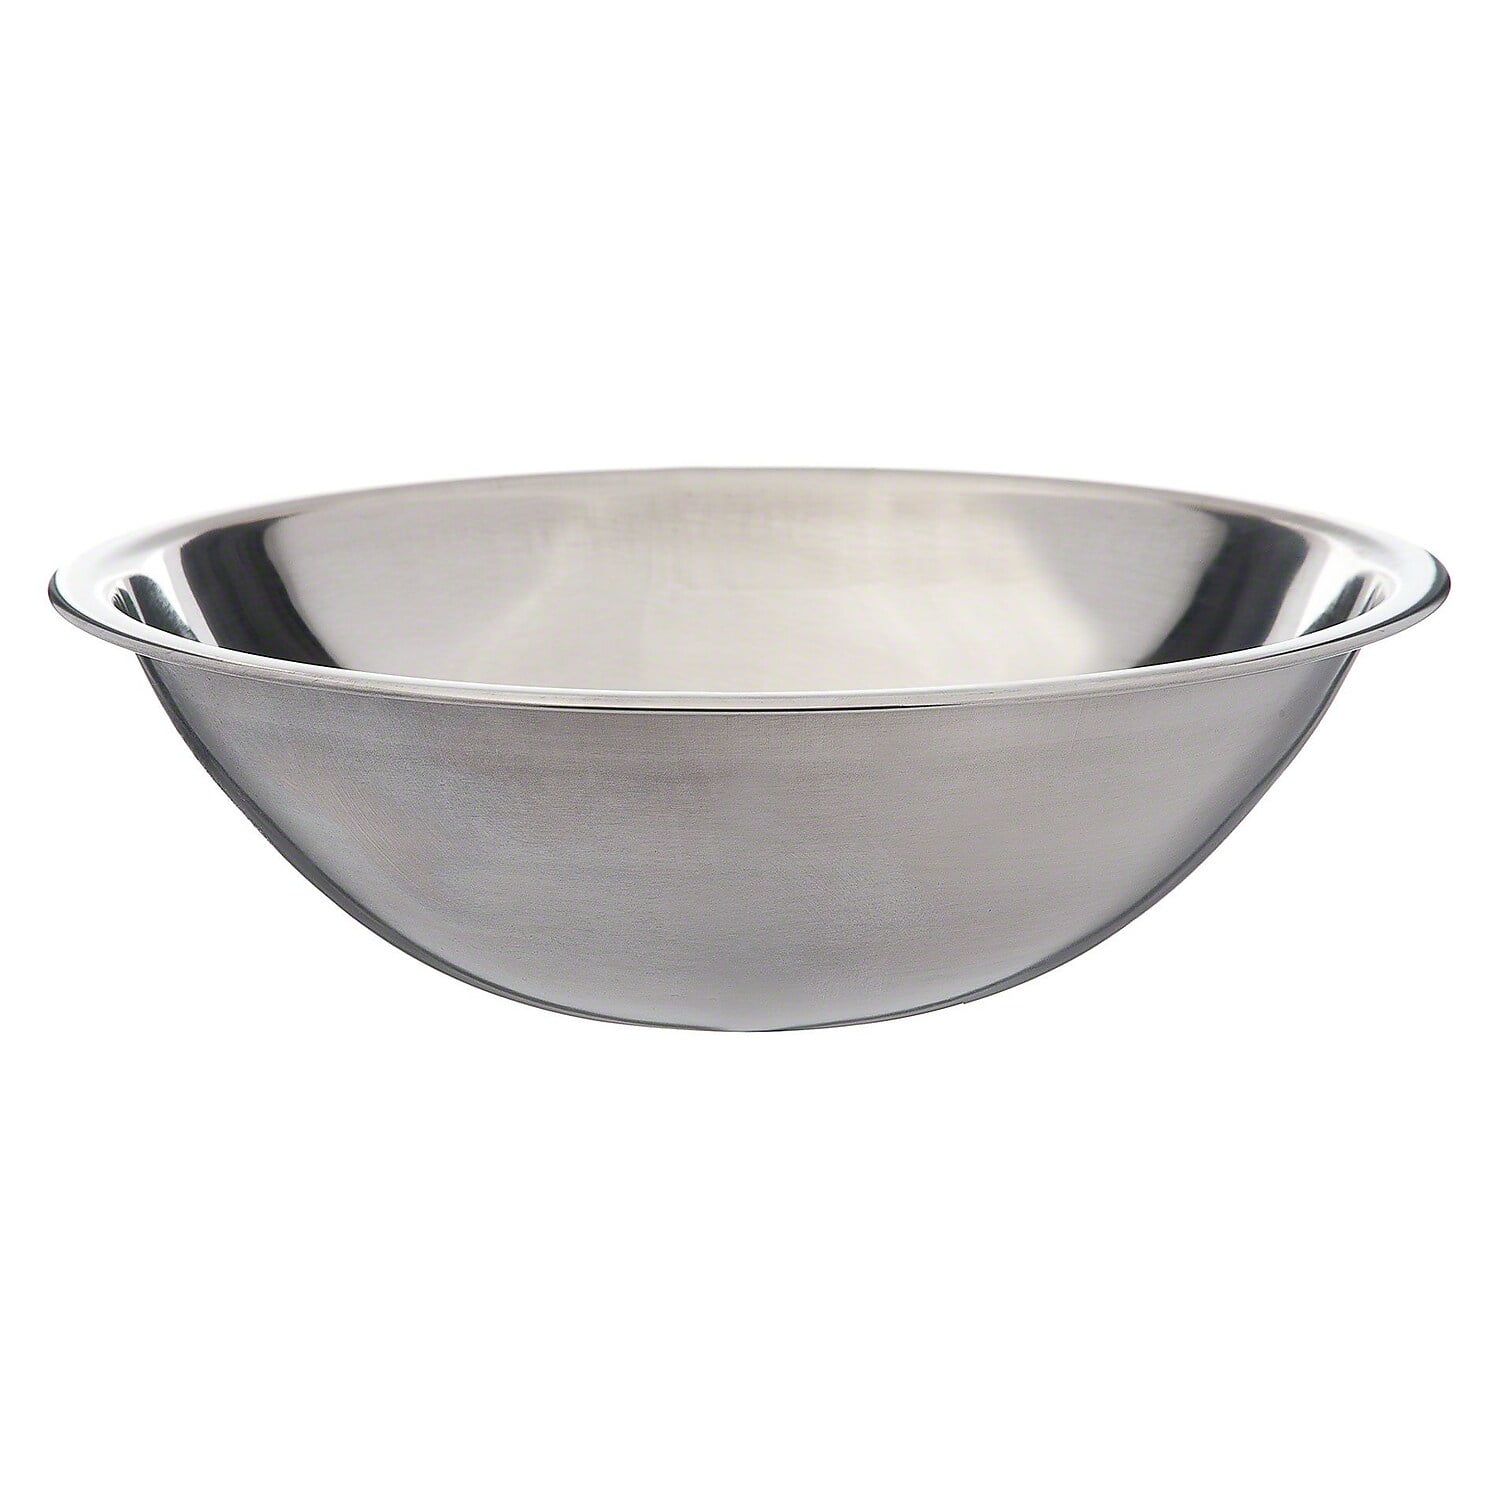 YBM Home Stainless Steel Deep Mixing Bowl 10.25 Inches Diameter - Silver, 5 Quart